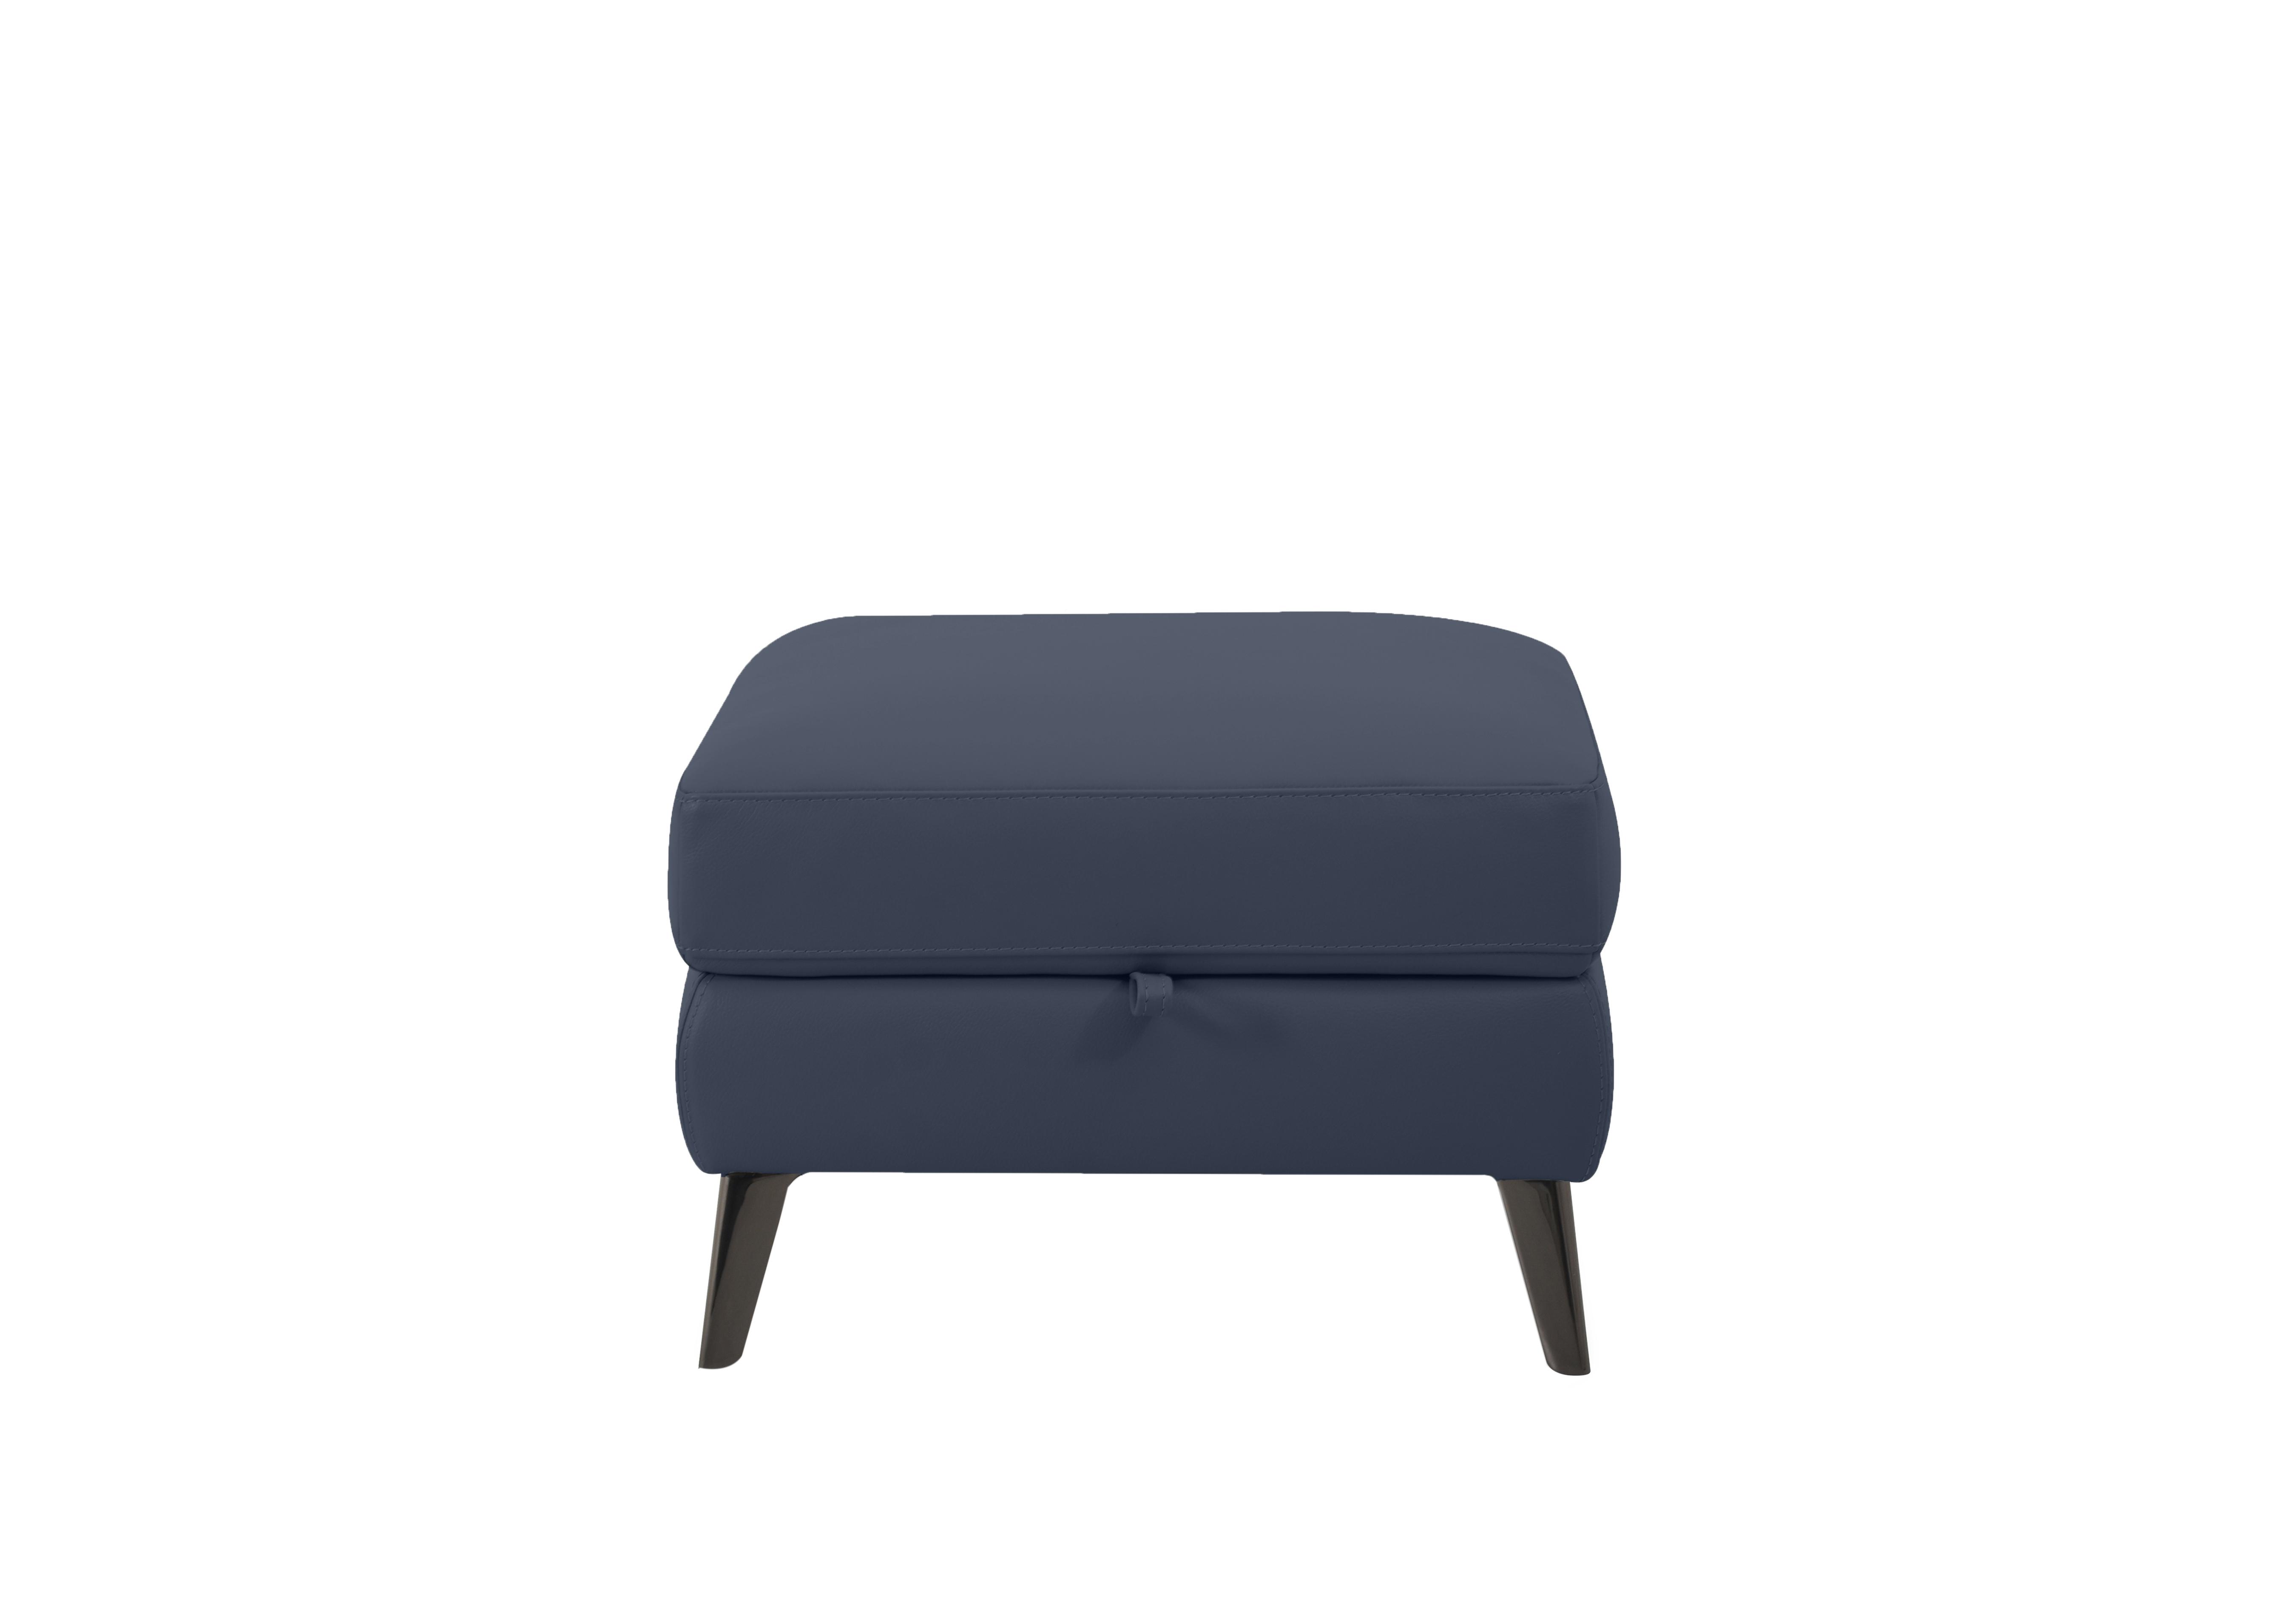 Axel Leather Storage Footstool in Bv-313e Ocean Blue on Furniture Village